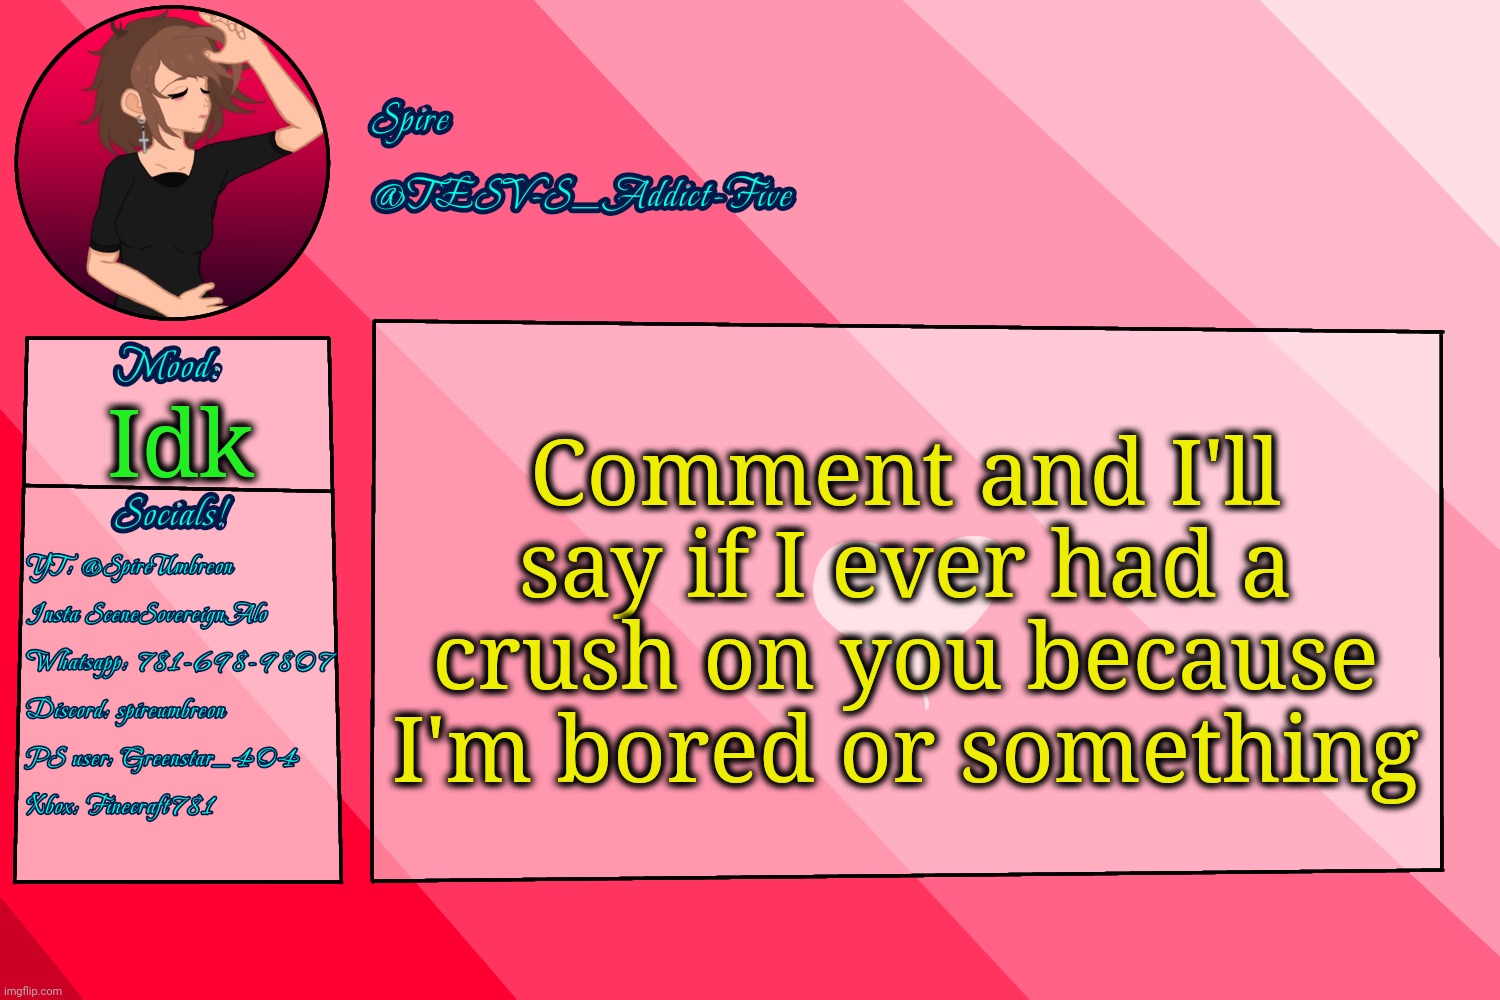 . | Comment and I'll say if I ever had a crush on you because I'm bored or something; Idk | image tagged in tesv-s_addict-five announcement template | made w/ Imgflip meme maker